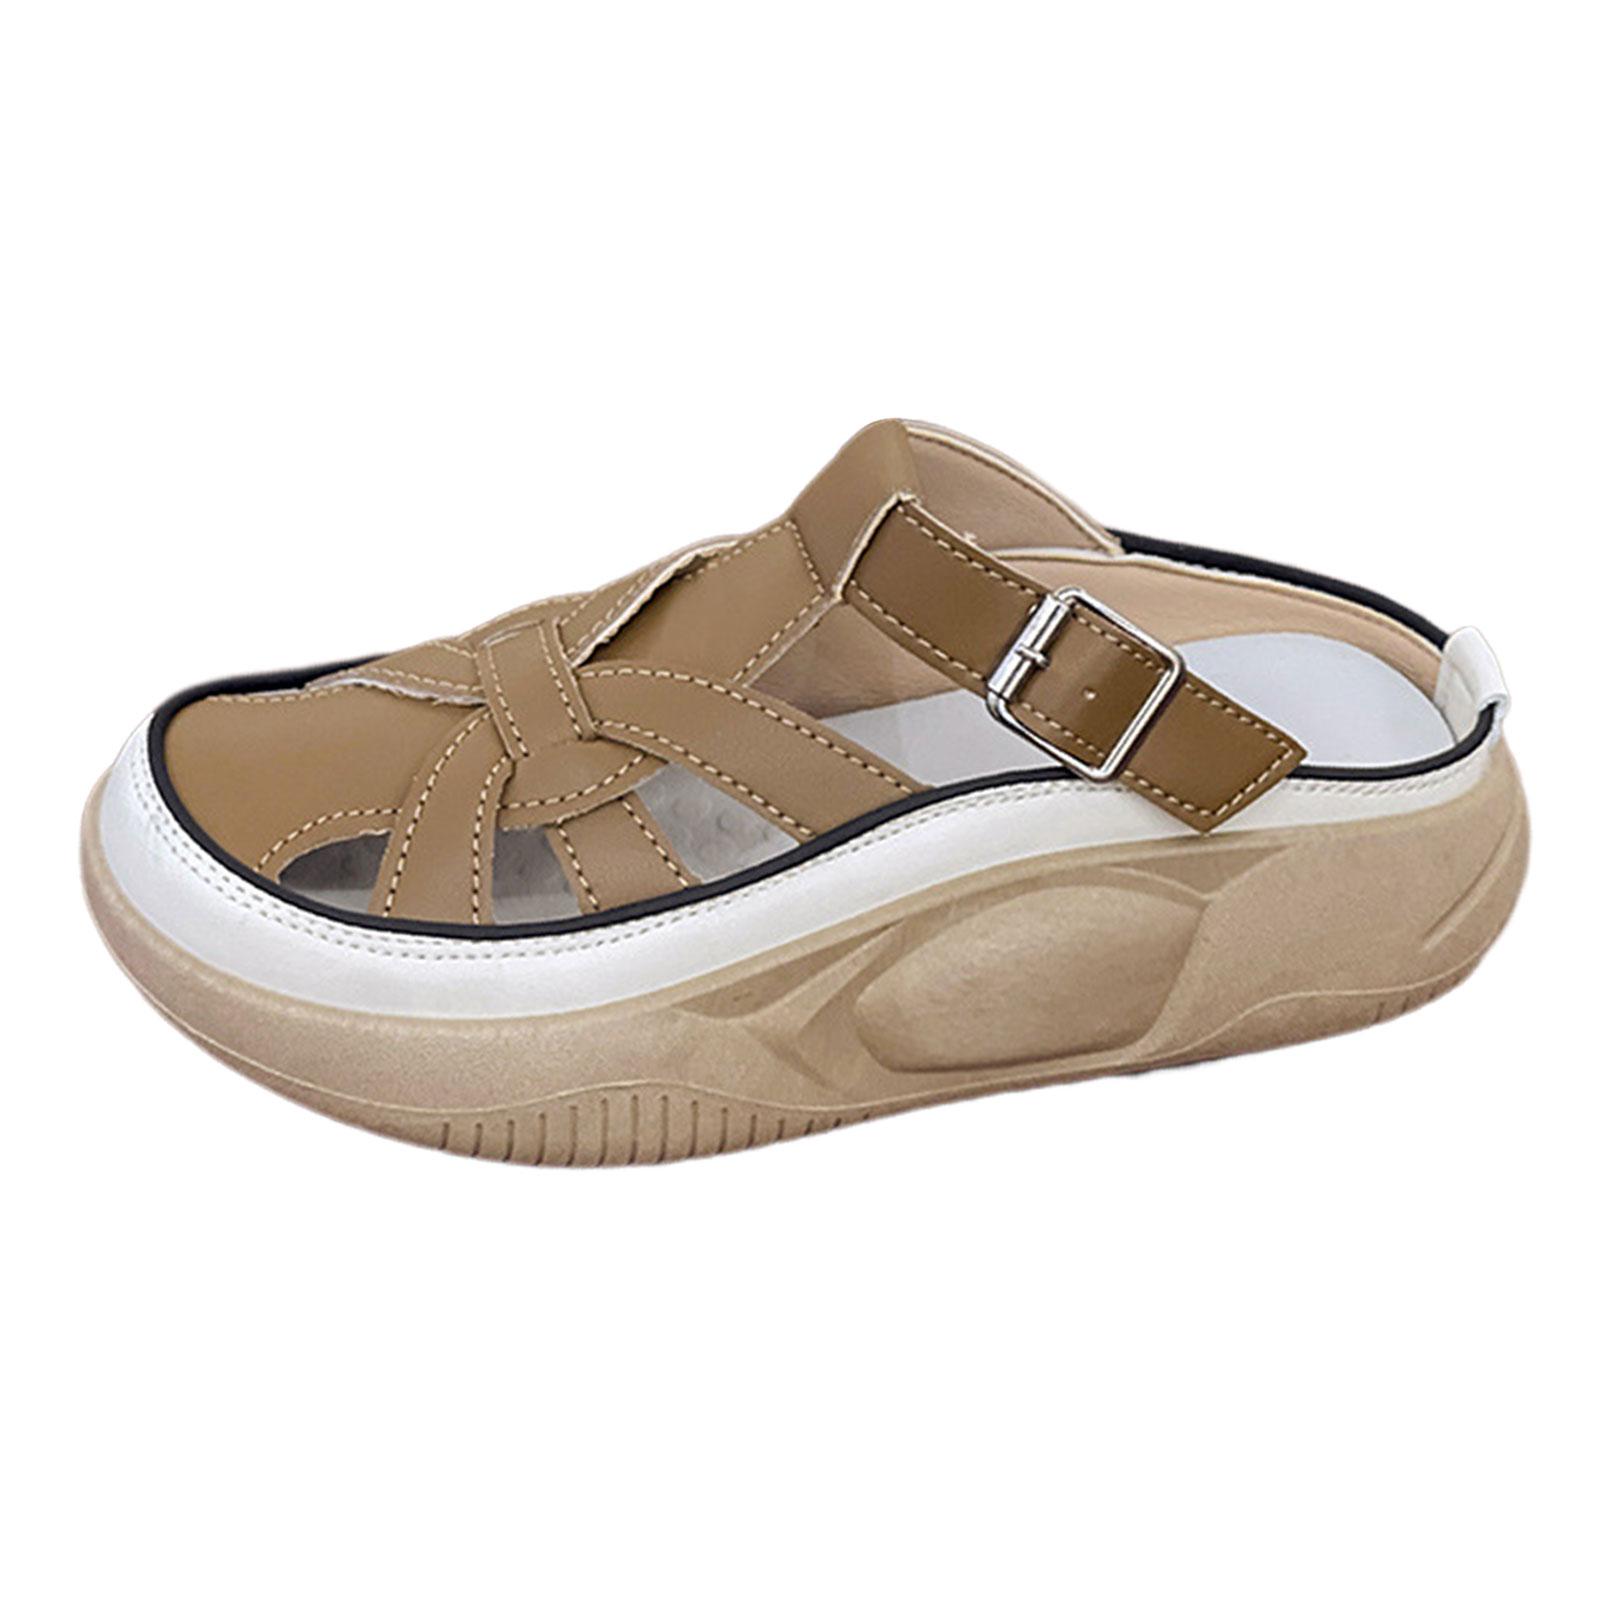 Women Sandals Casual Slippers Ladies Girls Thick Sole Pool Female for Travel 37 Camel